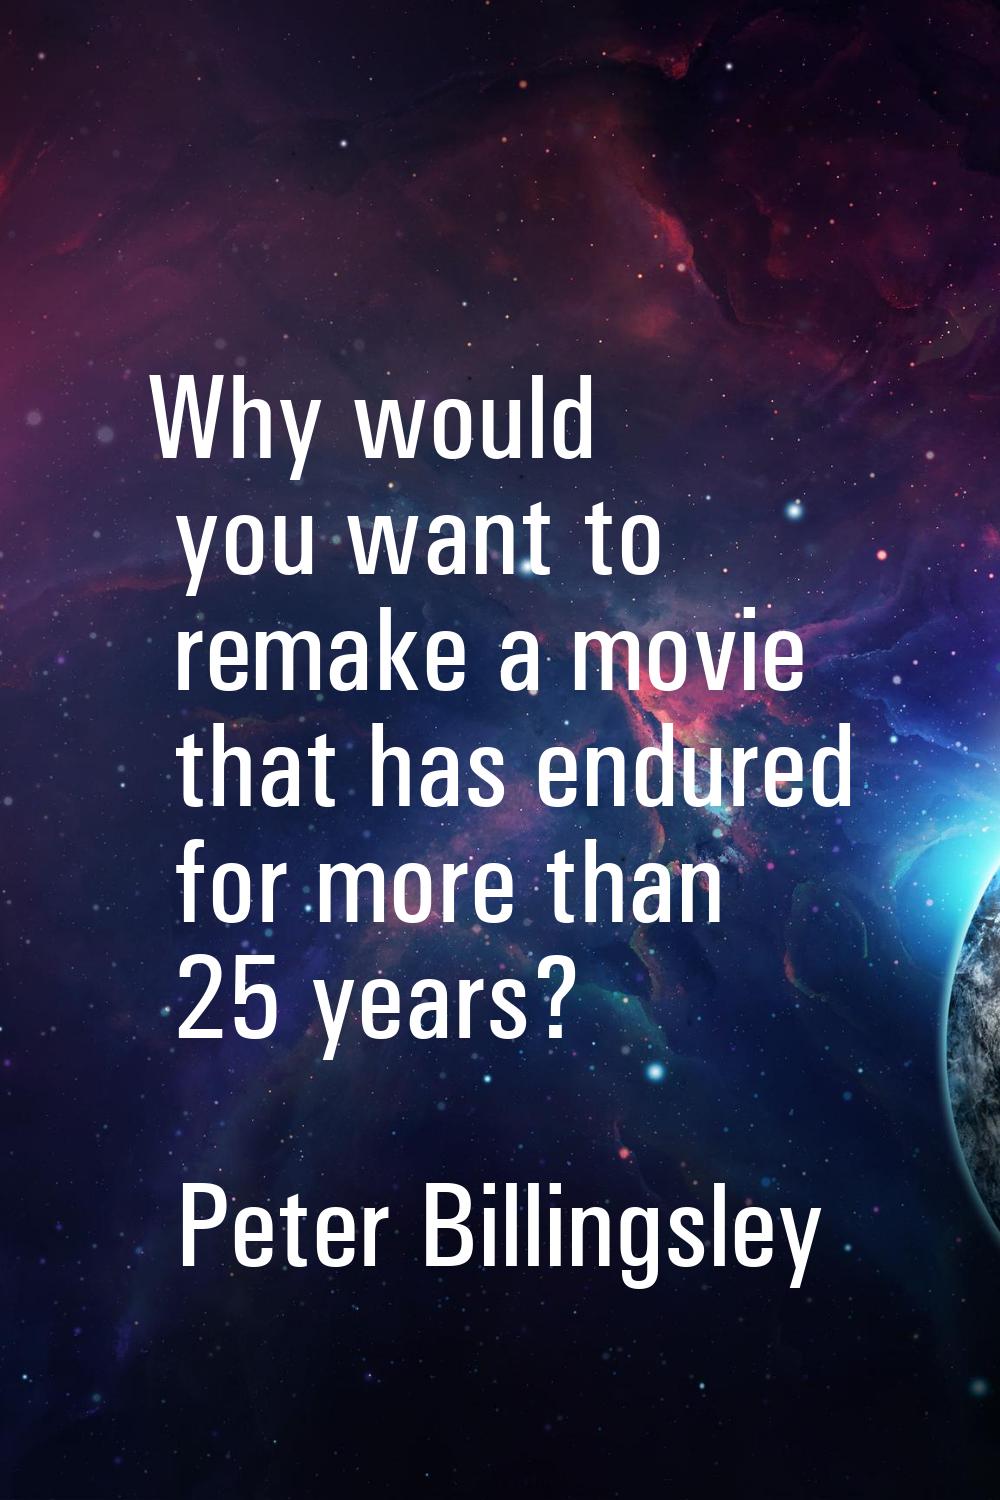 Why would you want to remake a movie that has endured for more than 25 years?